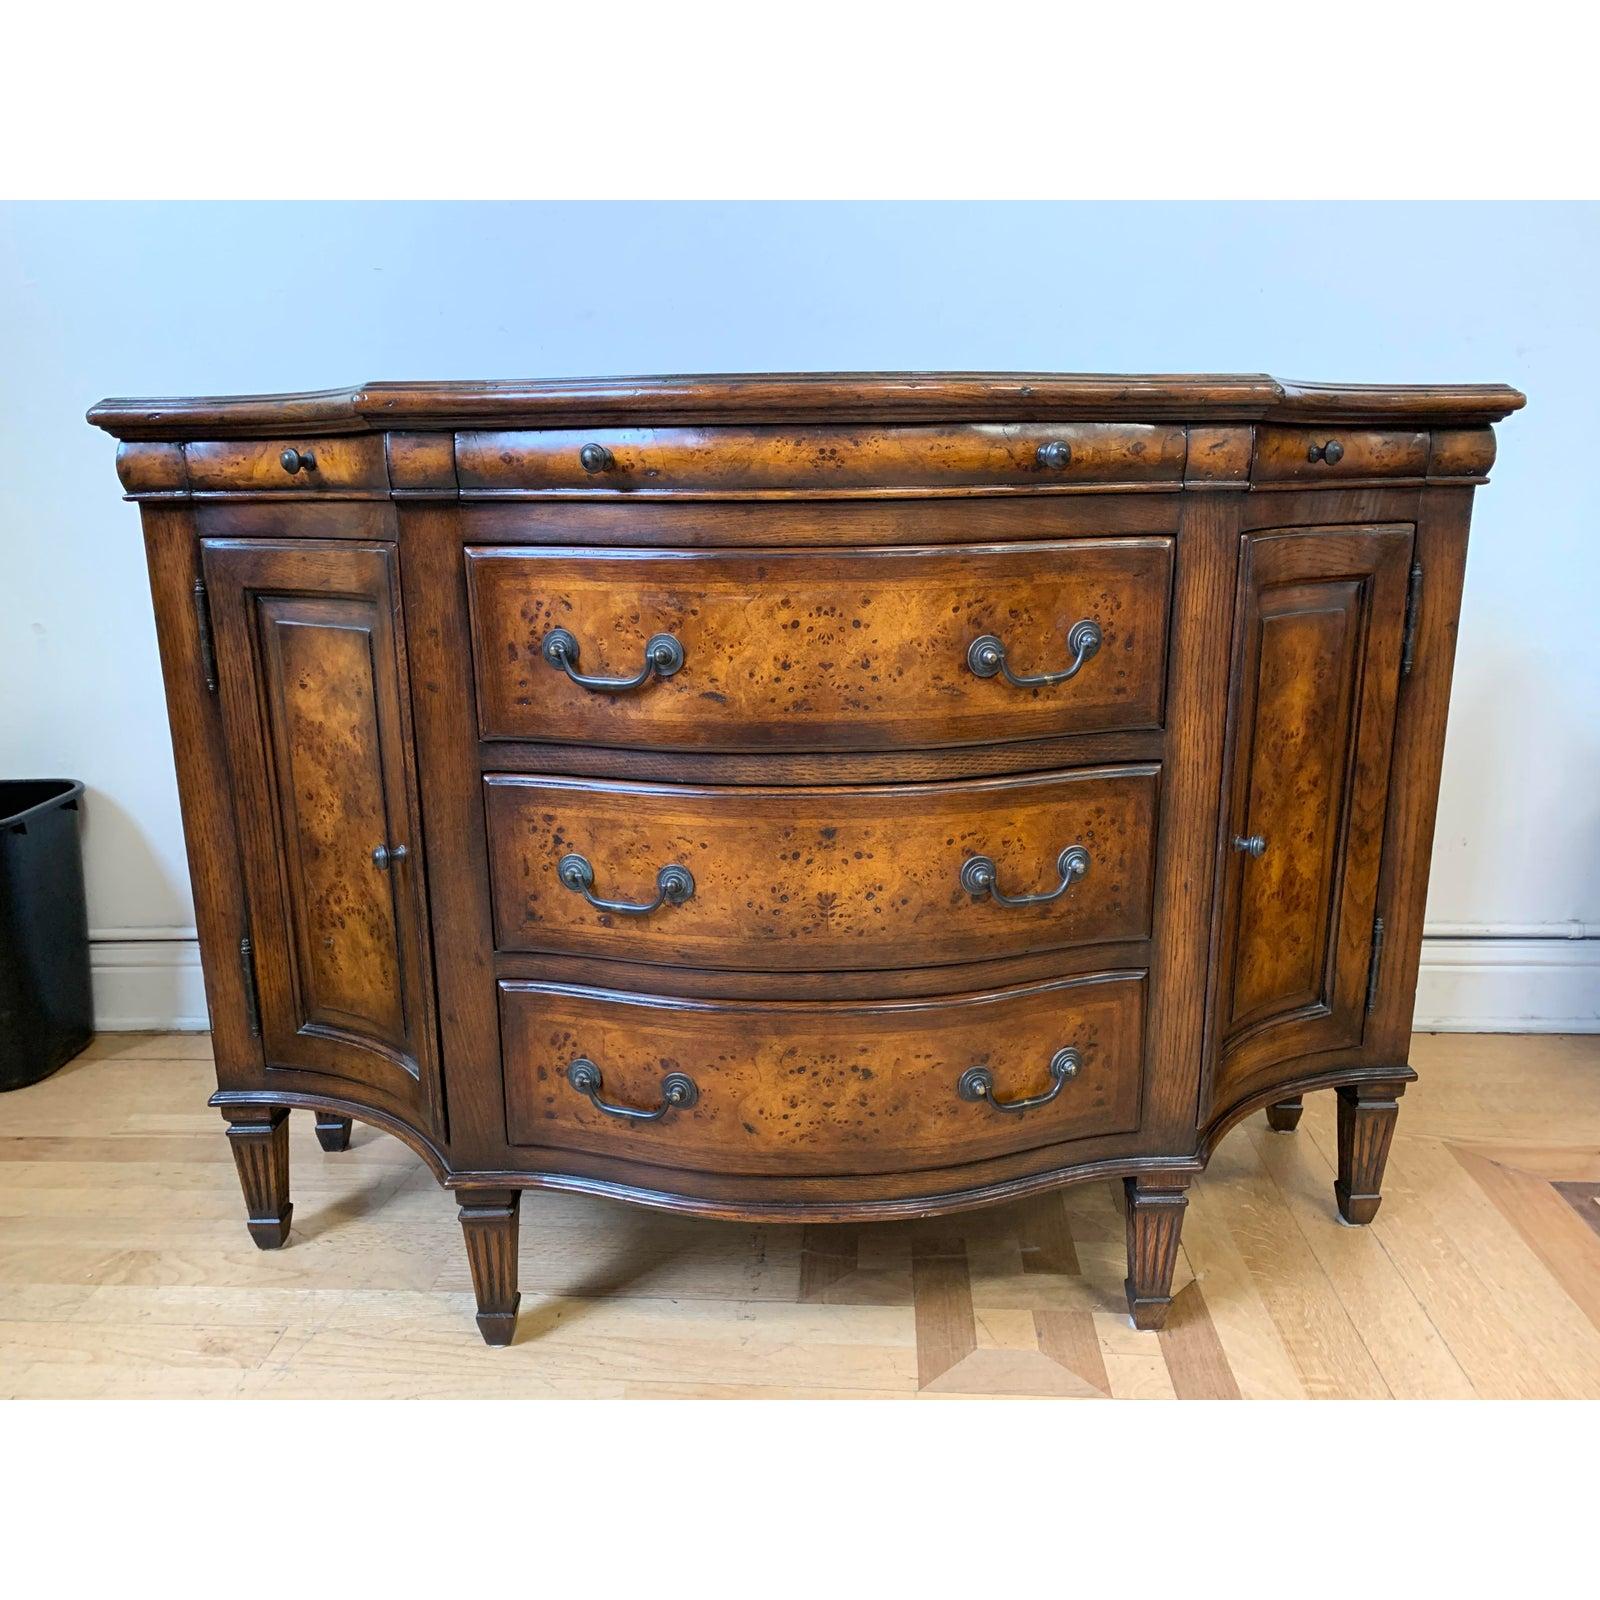 A Theodore Alexander curved front sideboard. Beautiful burled maple wood is contrasted with traditional lines and French inspired curved. Three shallow drawers on top make full use of the form with interior space on top. Three drawers of equal size